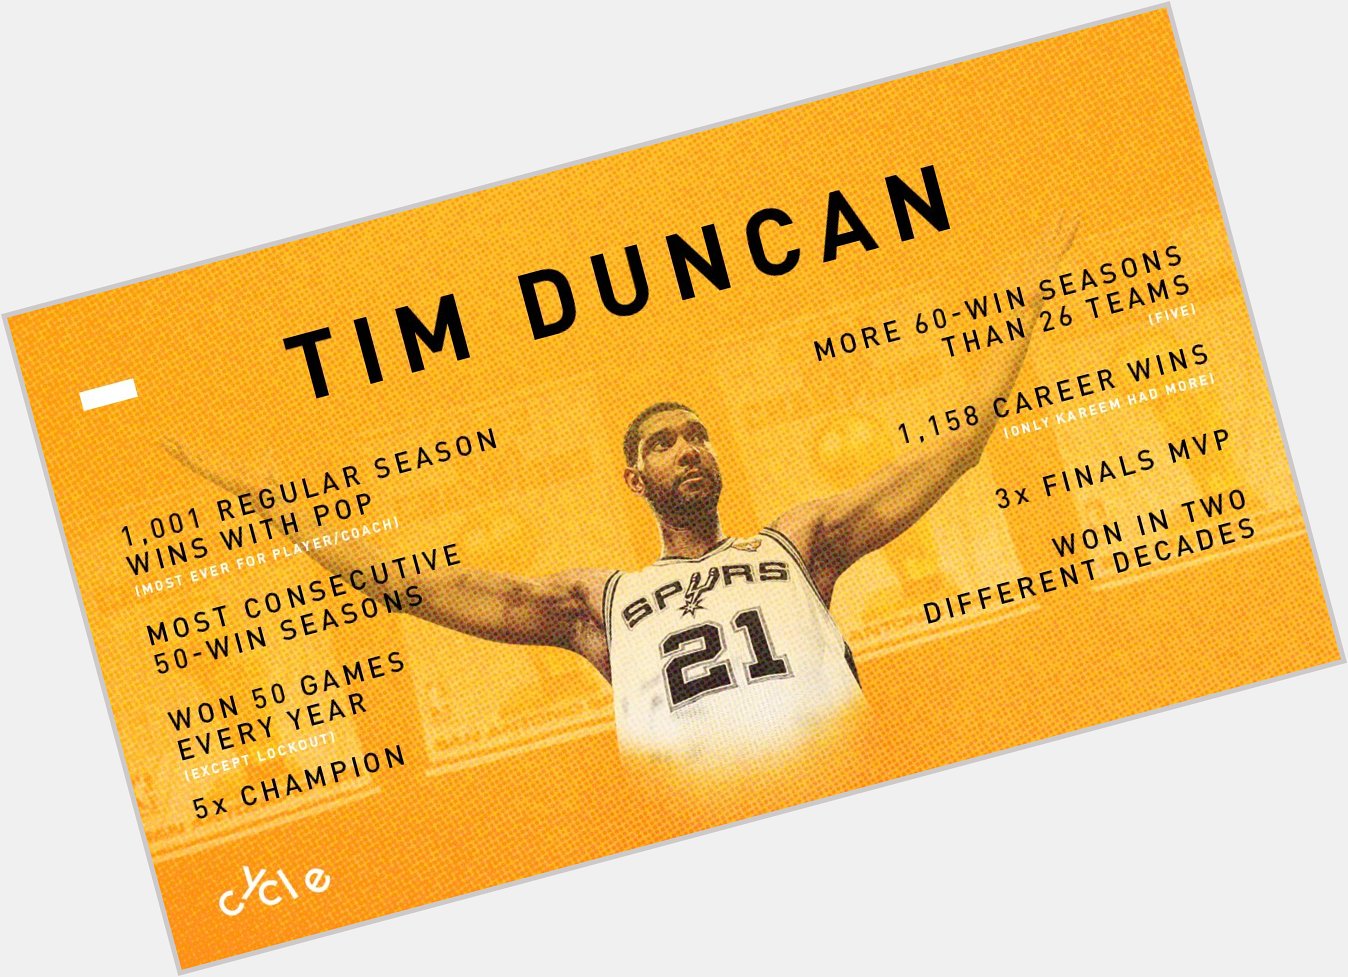 Happy birthday, Tim Duncan.

More wins than your favorite player. 